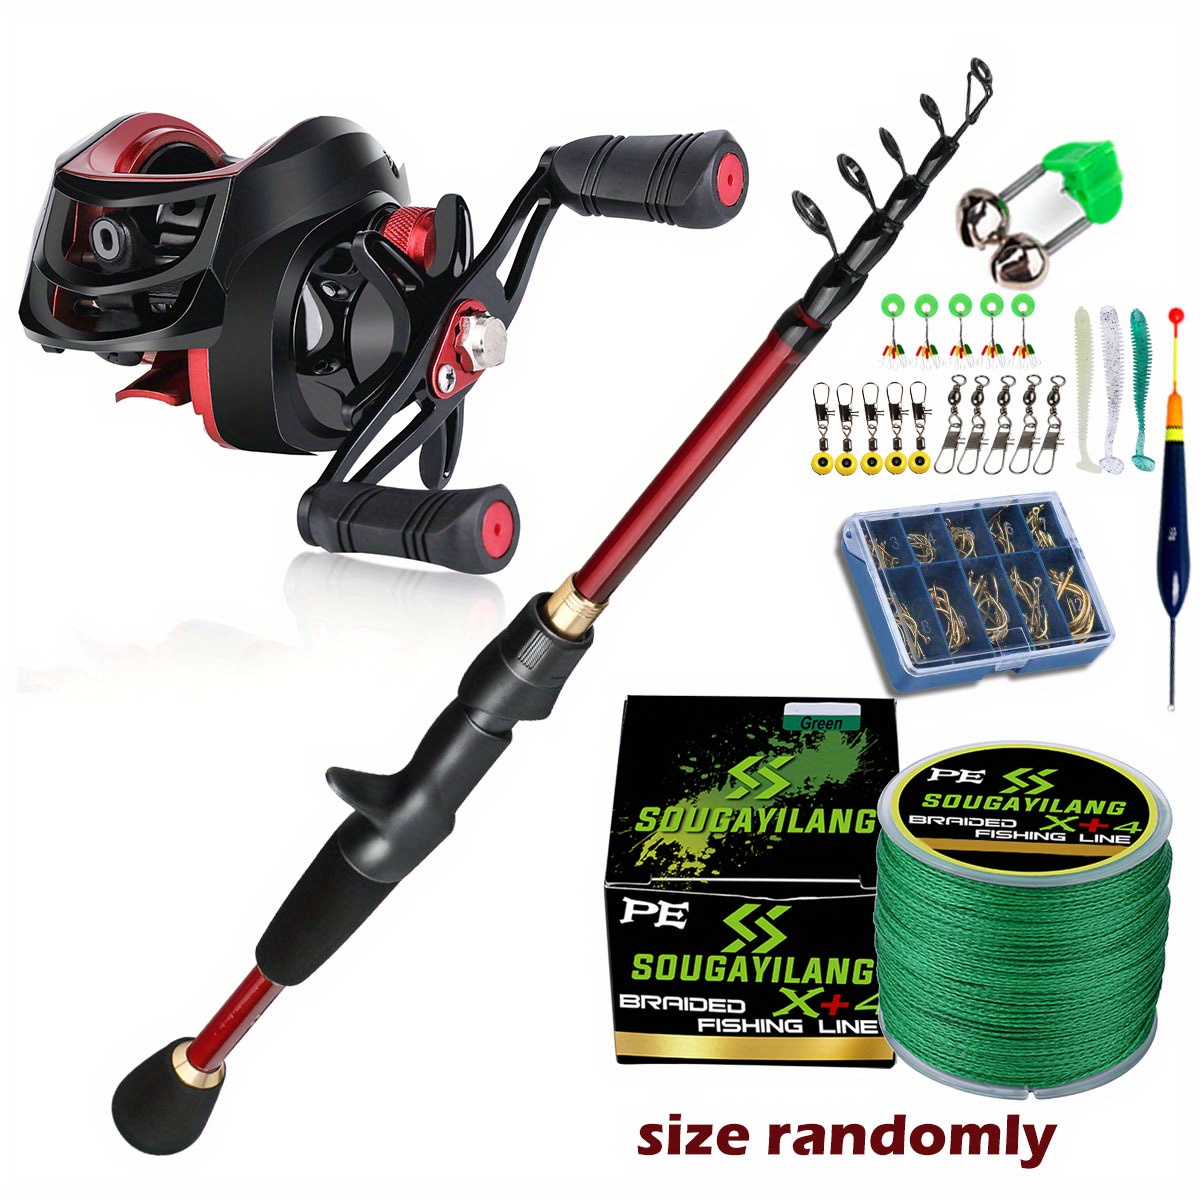 Sougayilang Telescopic Fishing Rod And Reel Set, Red, 70.86in-94.49in,  Maximum Unloading Force Of 11lbs, 150m PE Fishing Line, Bait, And  Accessories (